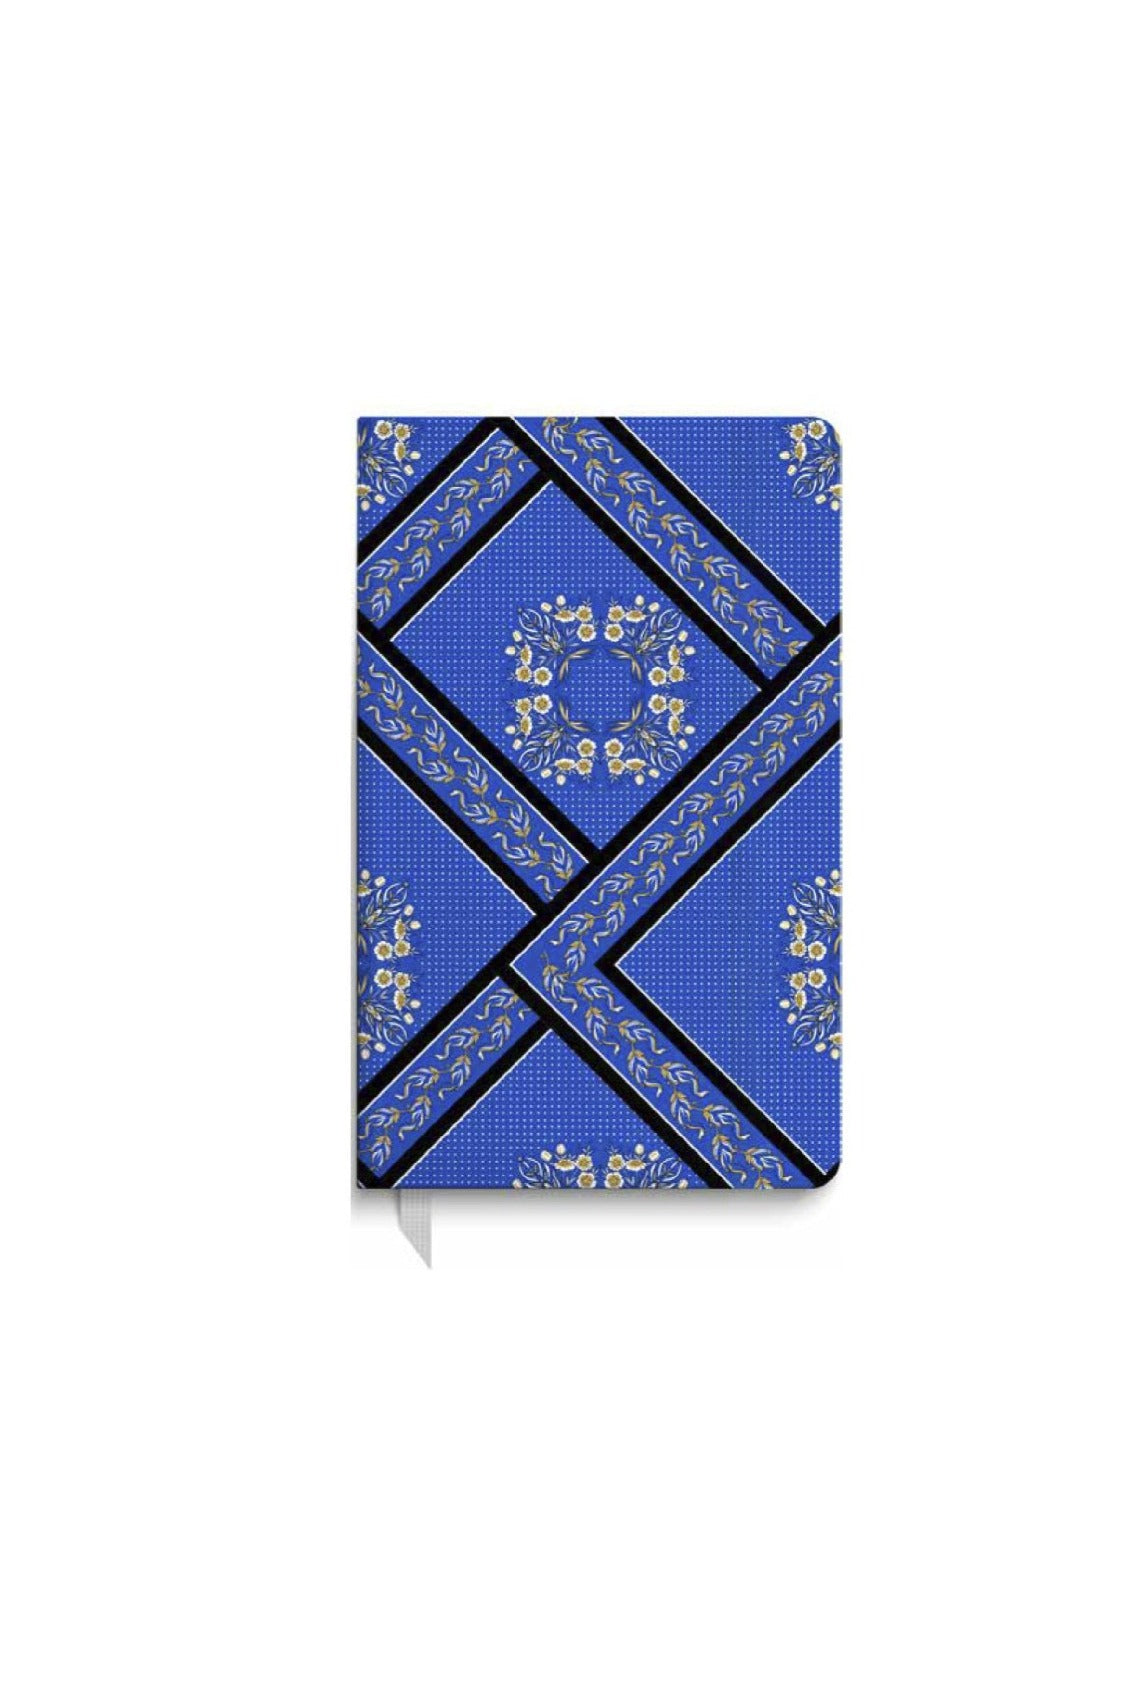 Notebook Cycle Blue Capa Dura A5